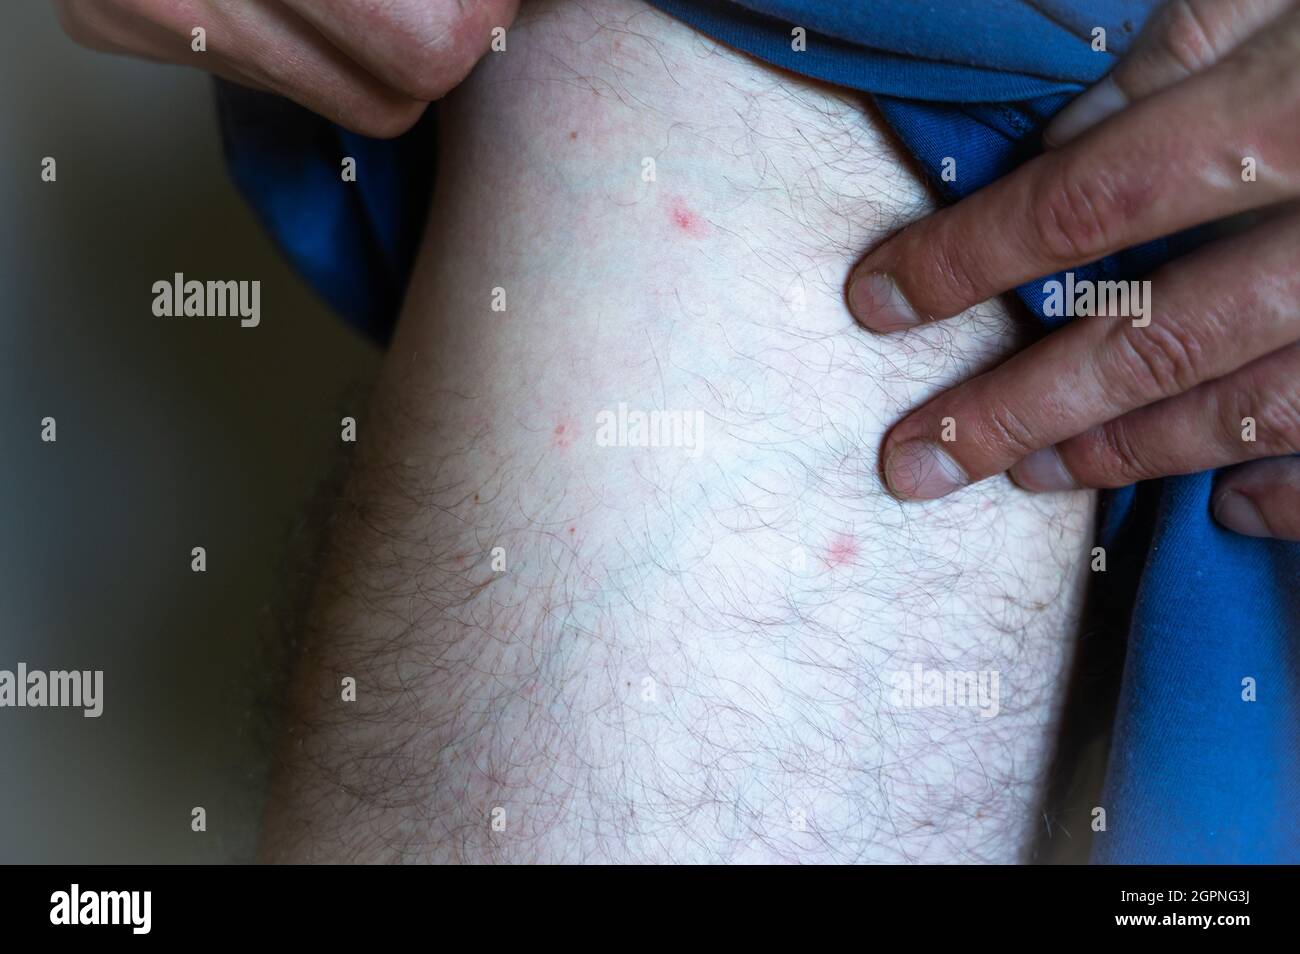 A rash on a man's leg near the intimate area. Man with symptoms of itchy urticaria. Stock Photo